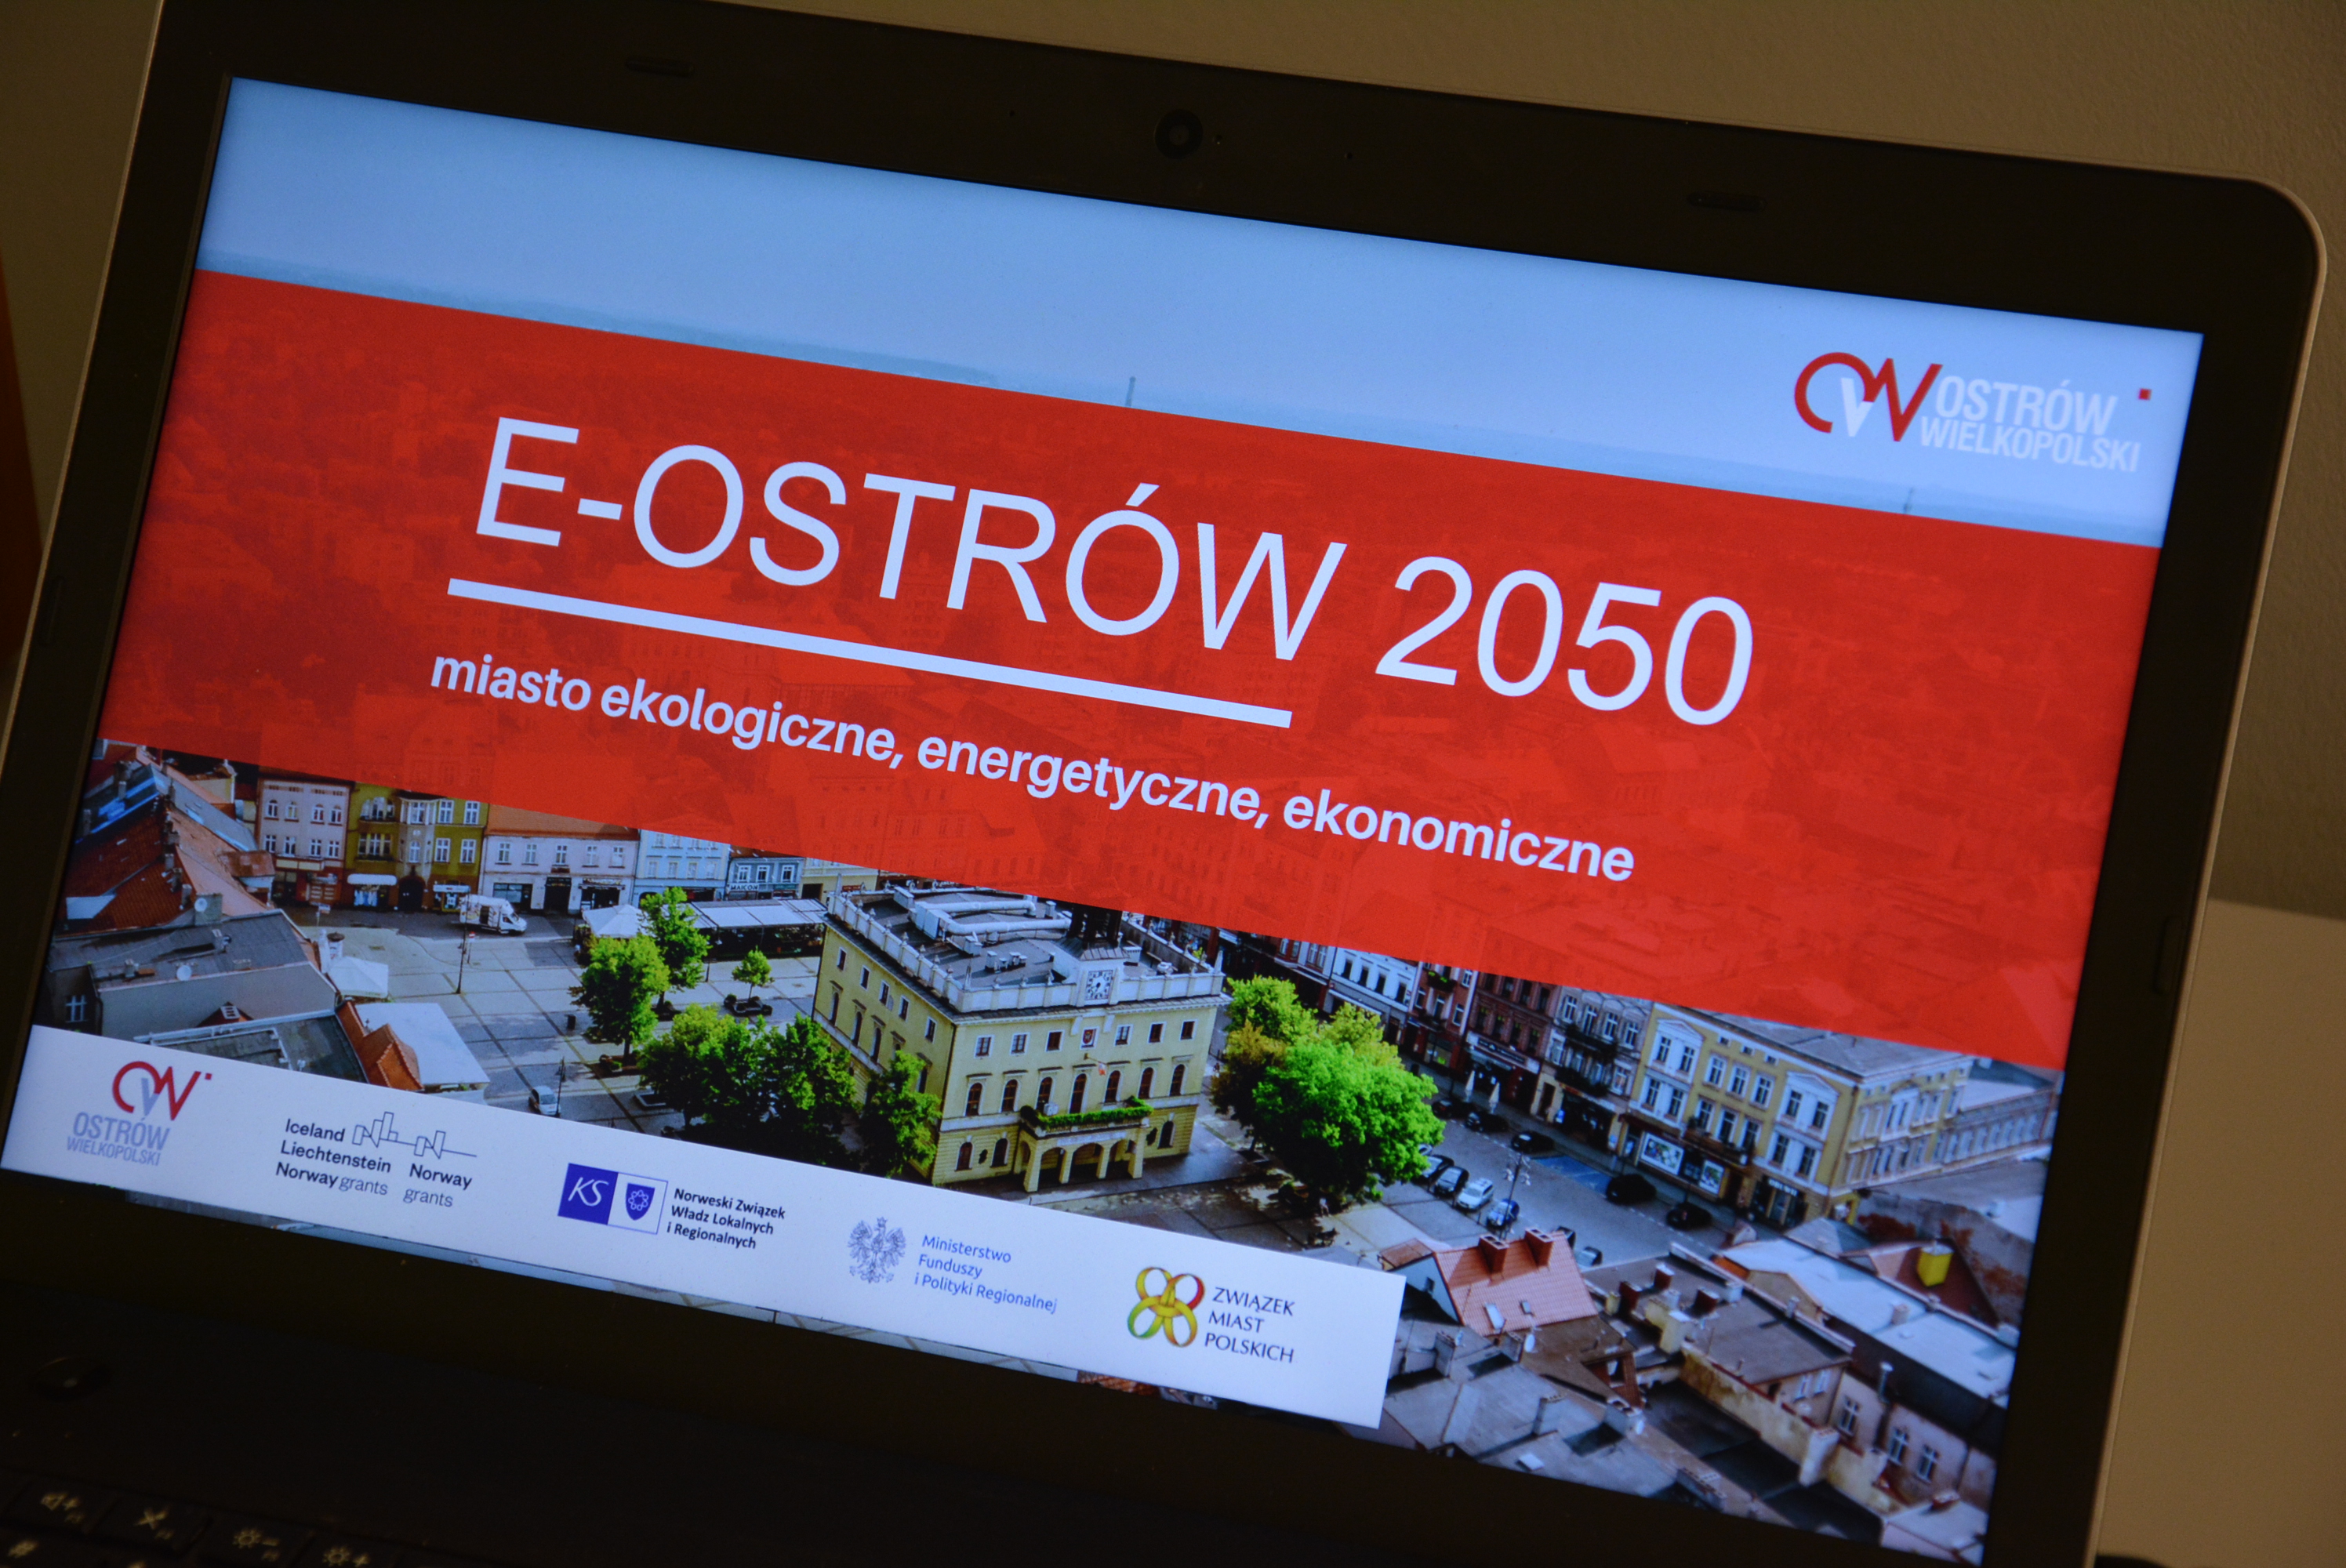 Laptop board for the project -Ostrów 2050 - an Ecological, Energy and Economic City